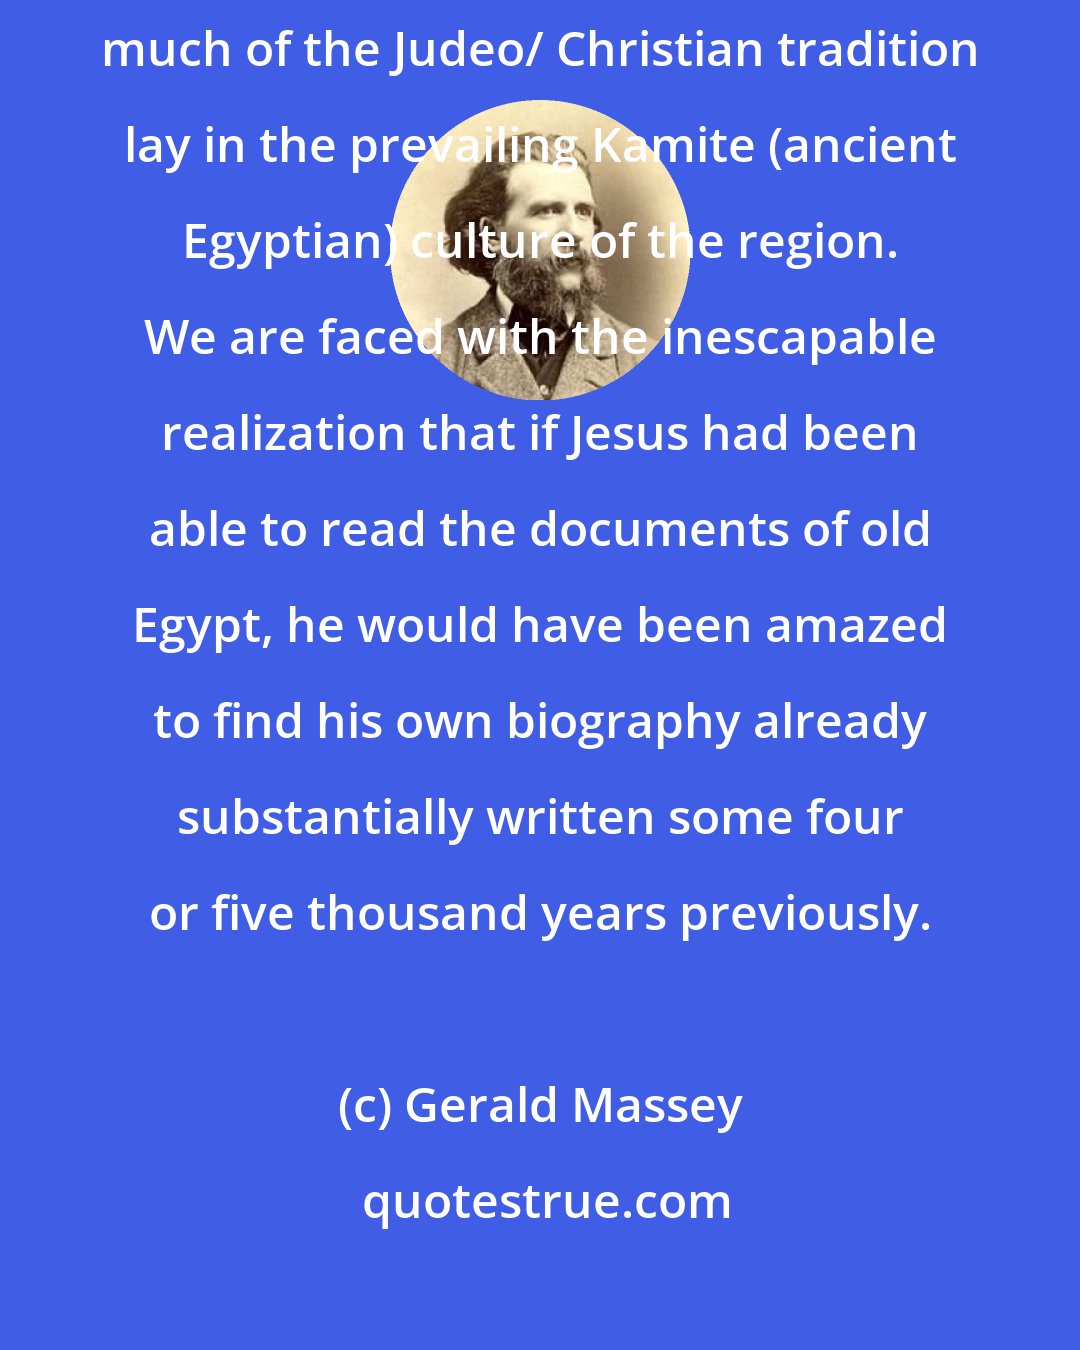 Gerald Massey: Christianity was neither original nor unique, but that the roots of much of the Judeo/ Christian tradition lay in the prevailing Kamite (ancient Egyptian) culture of the region. We are faced with the inescapable realization that if Jesus had been able to read the documents of old Egypt, he would have been amazed to find his own biography already substantially written some four or five thousand years previously.